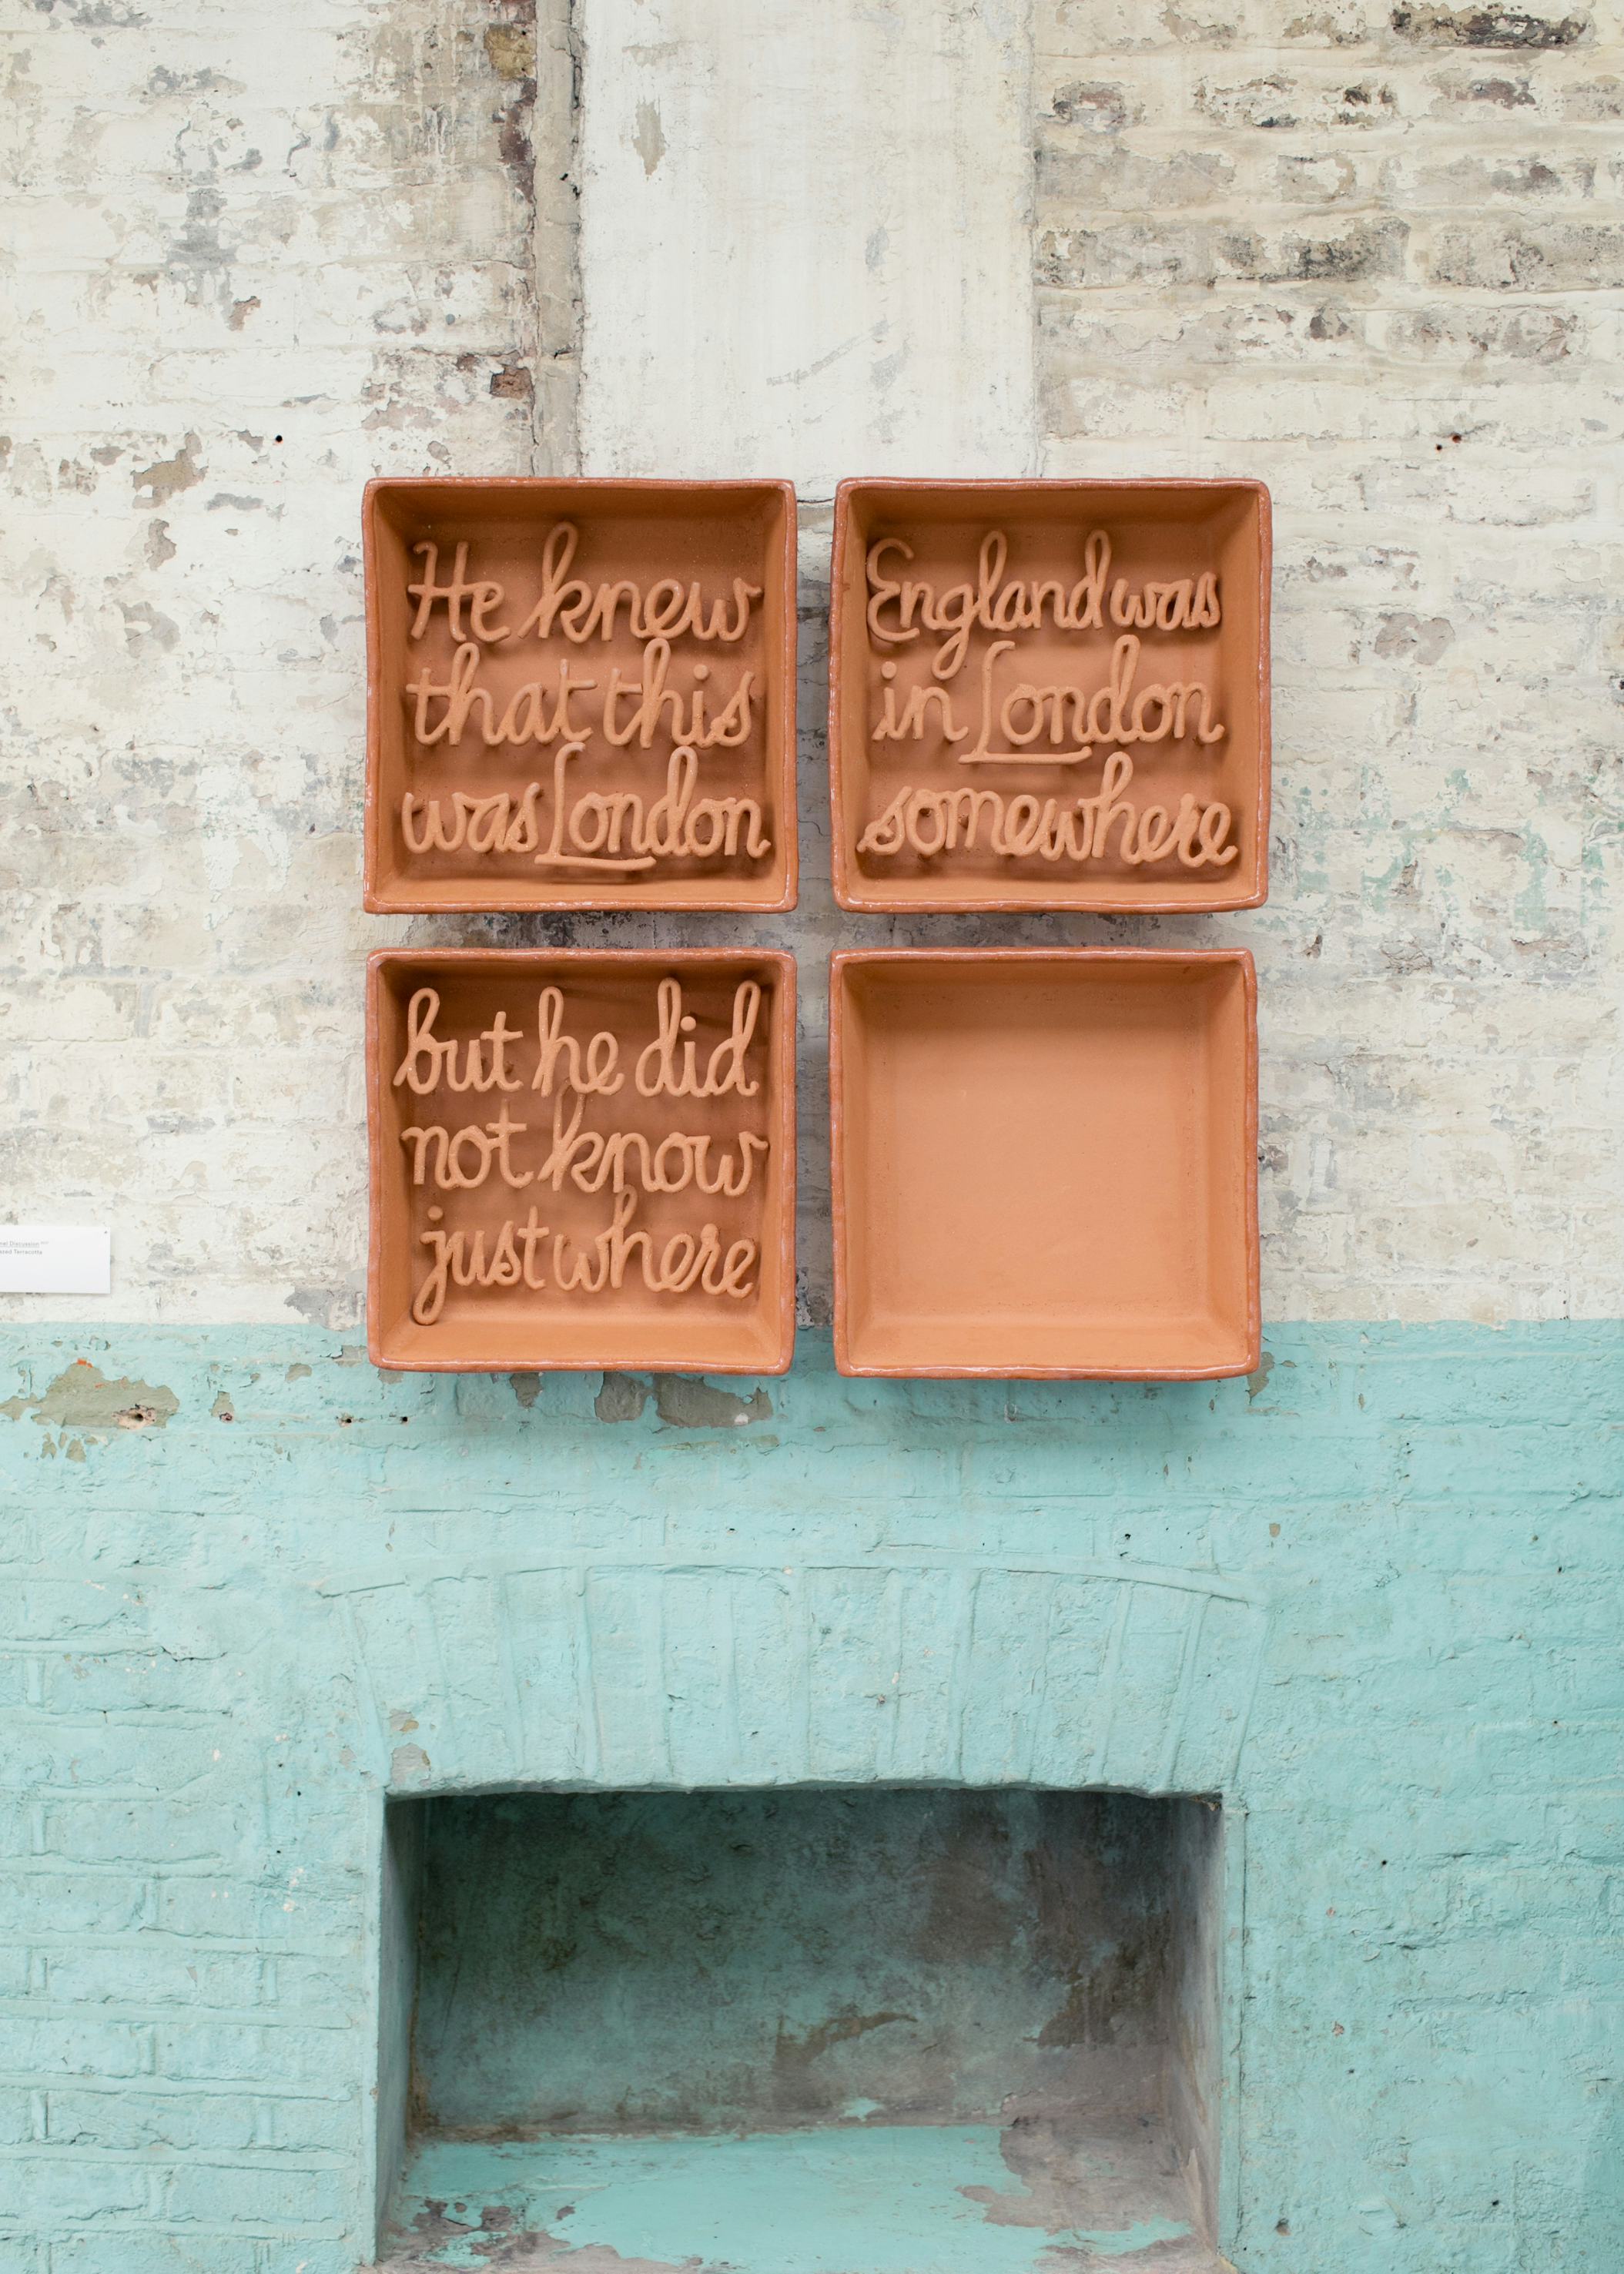 A ceramic artwork in four pieces hanging on a painted brick wall above an old fireplace. The artwork includes the text ‘He knew that was London. England was in London somewhere. But he did not know just where’